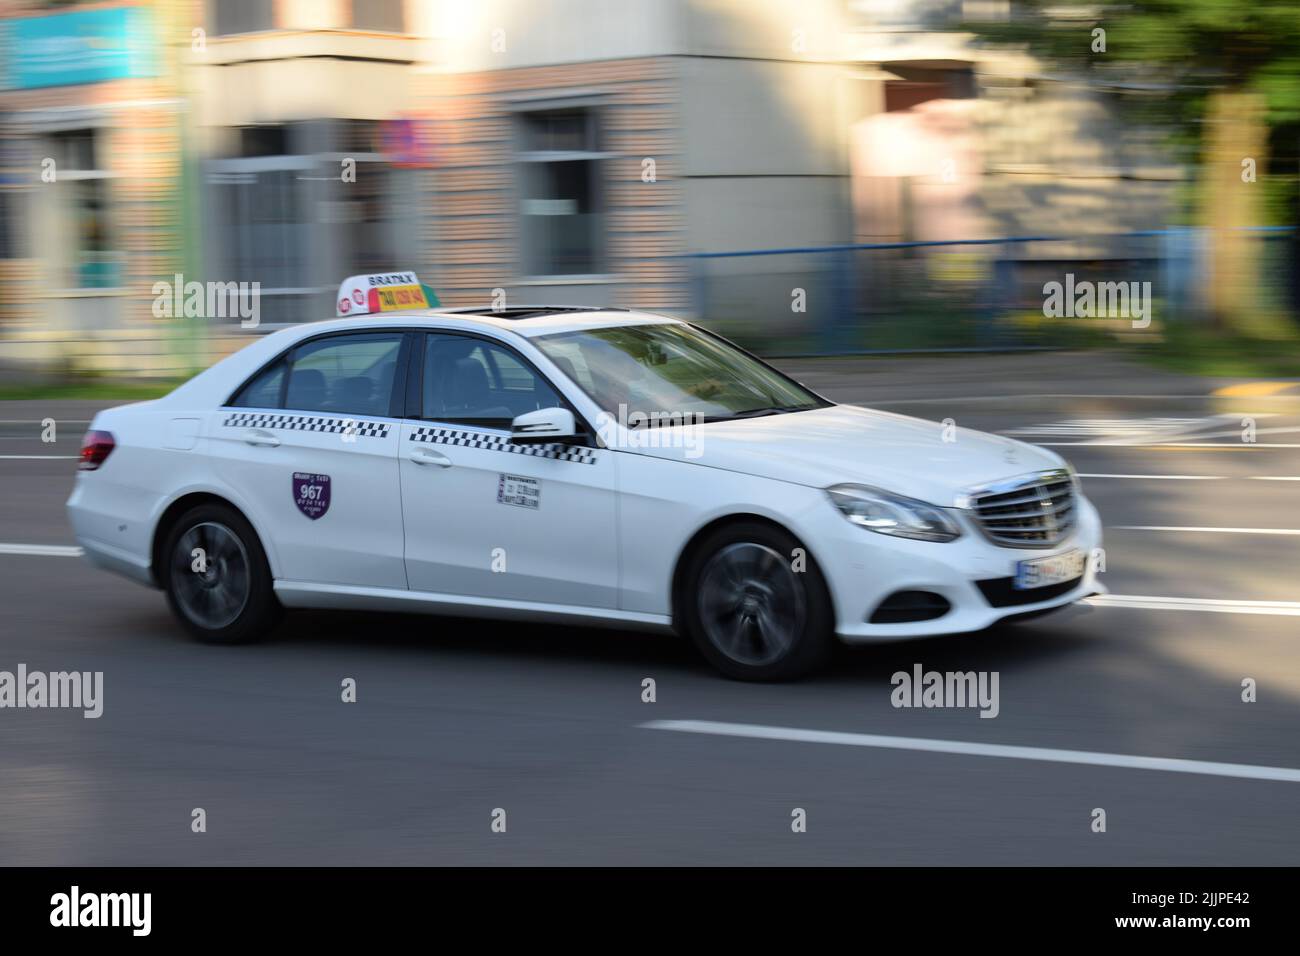 A white Mercedes-Benz taxi car on the street in Brasov, Romania, in summer Stock Photo